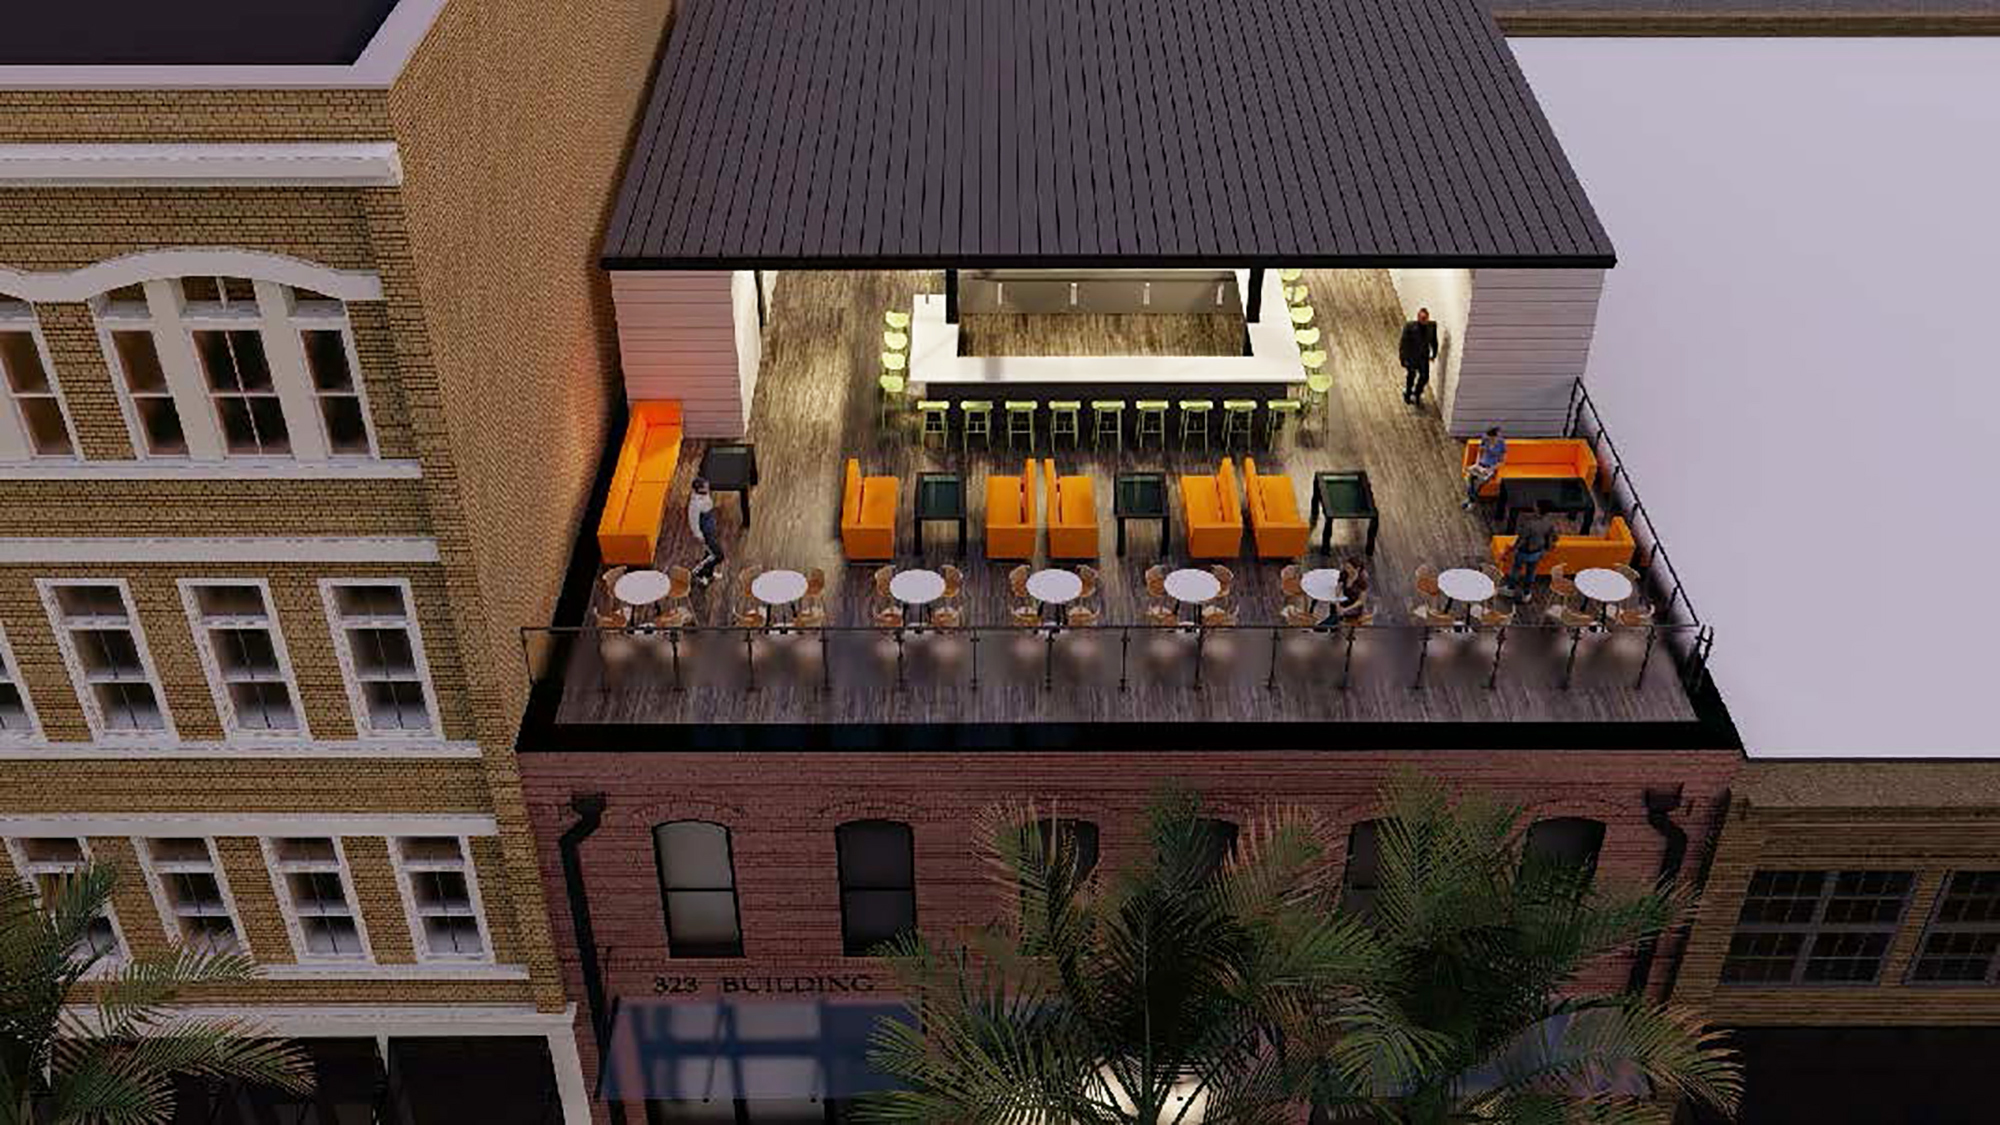 Plans include a 2,250-square-foot covered space on the rooftop along with an open-air bar.